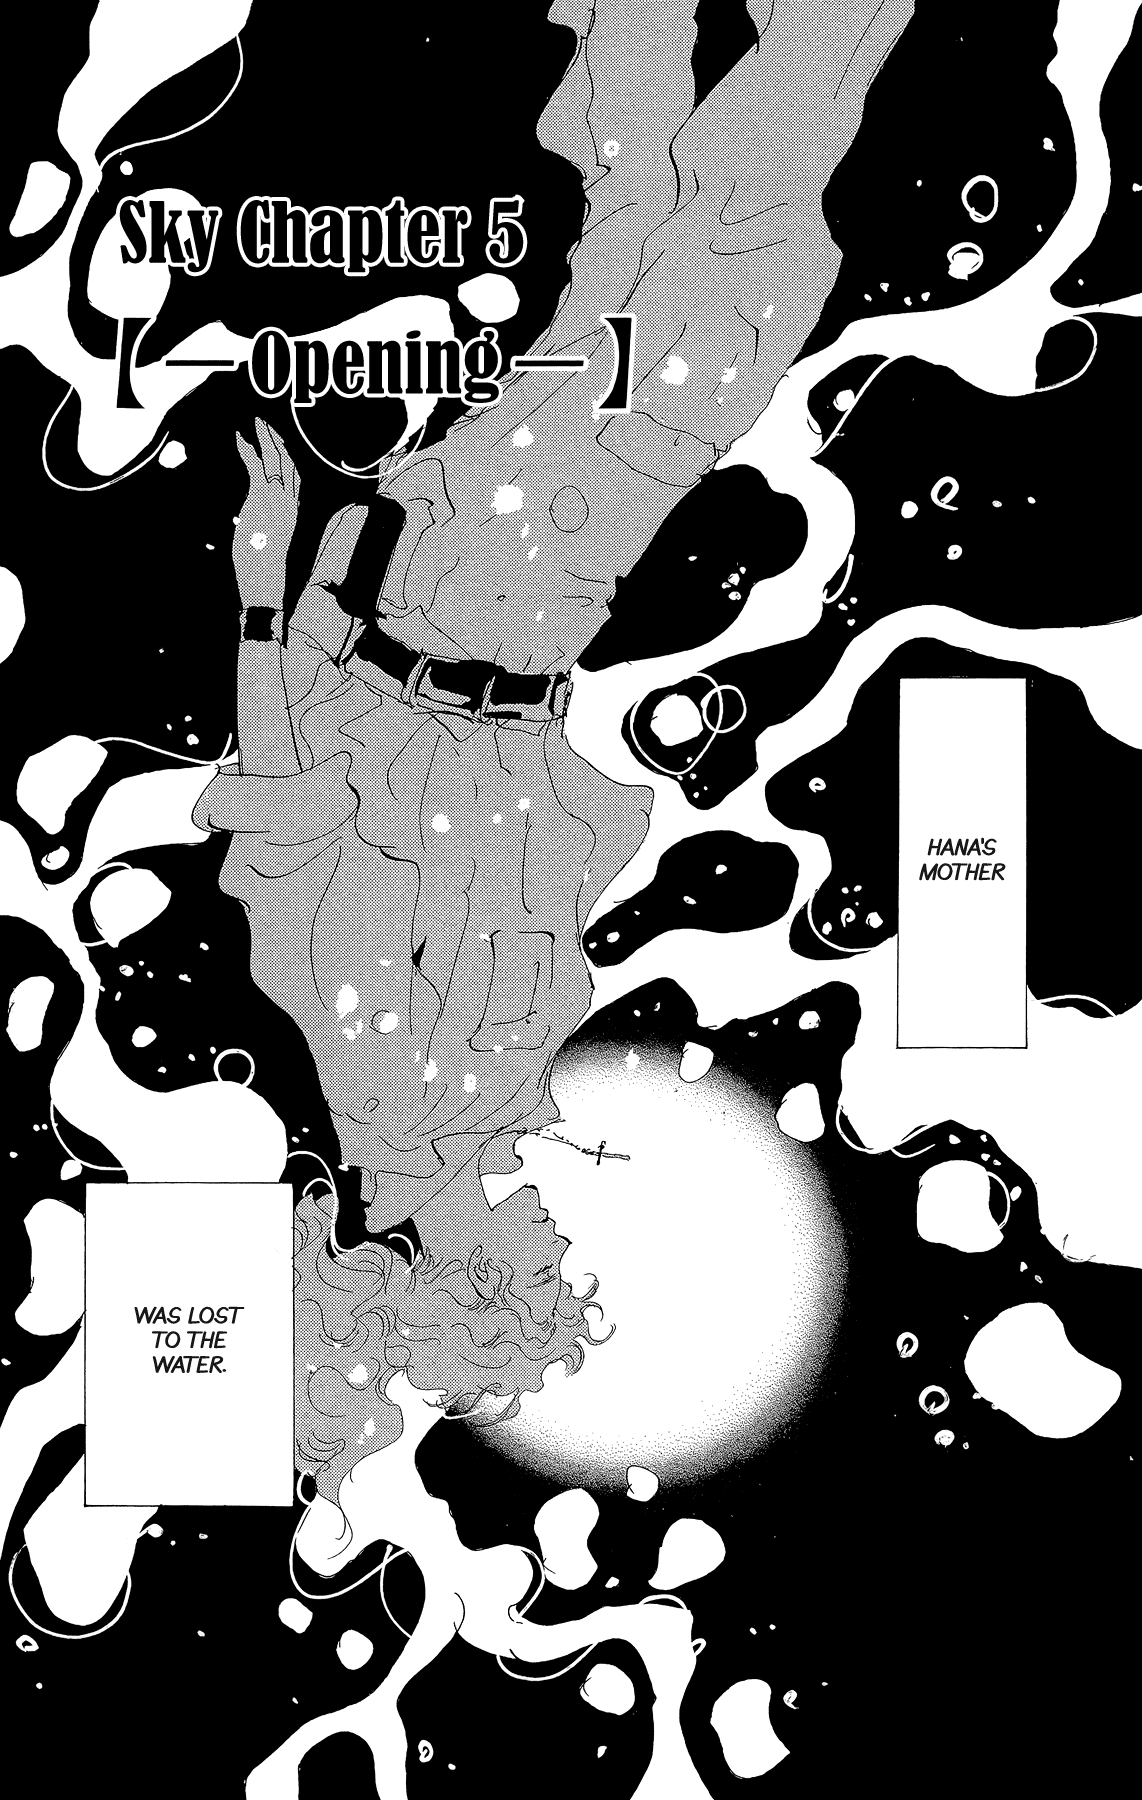 7 Seeds Vol. 33 Ch. 168 Sky Chapter 5 [Opening]